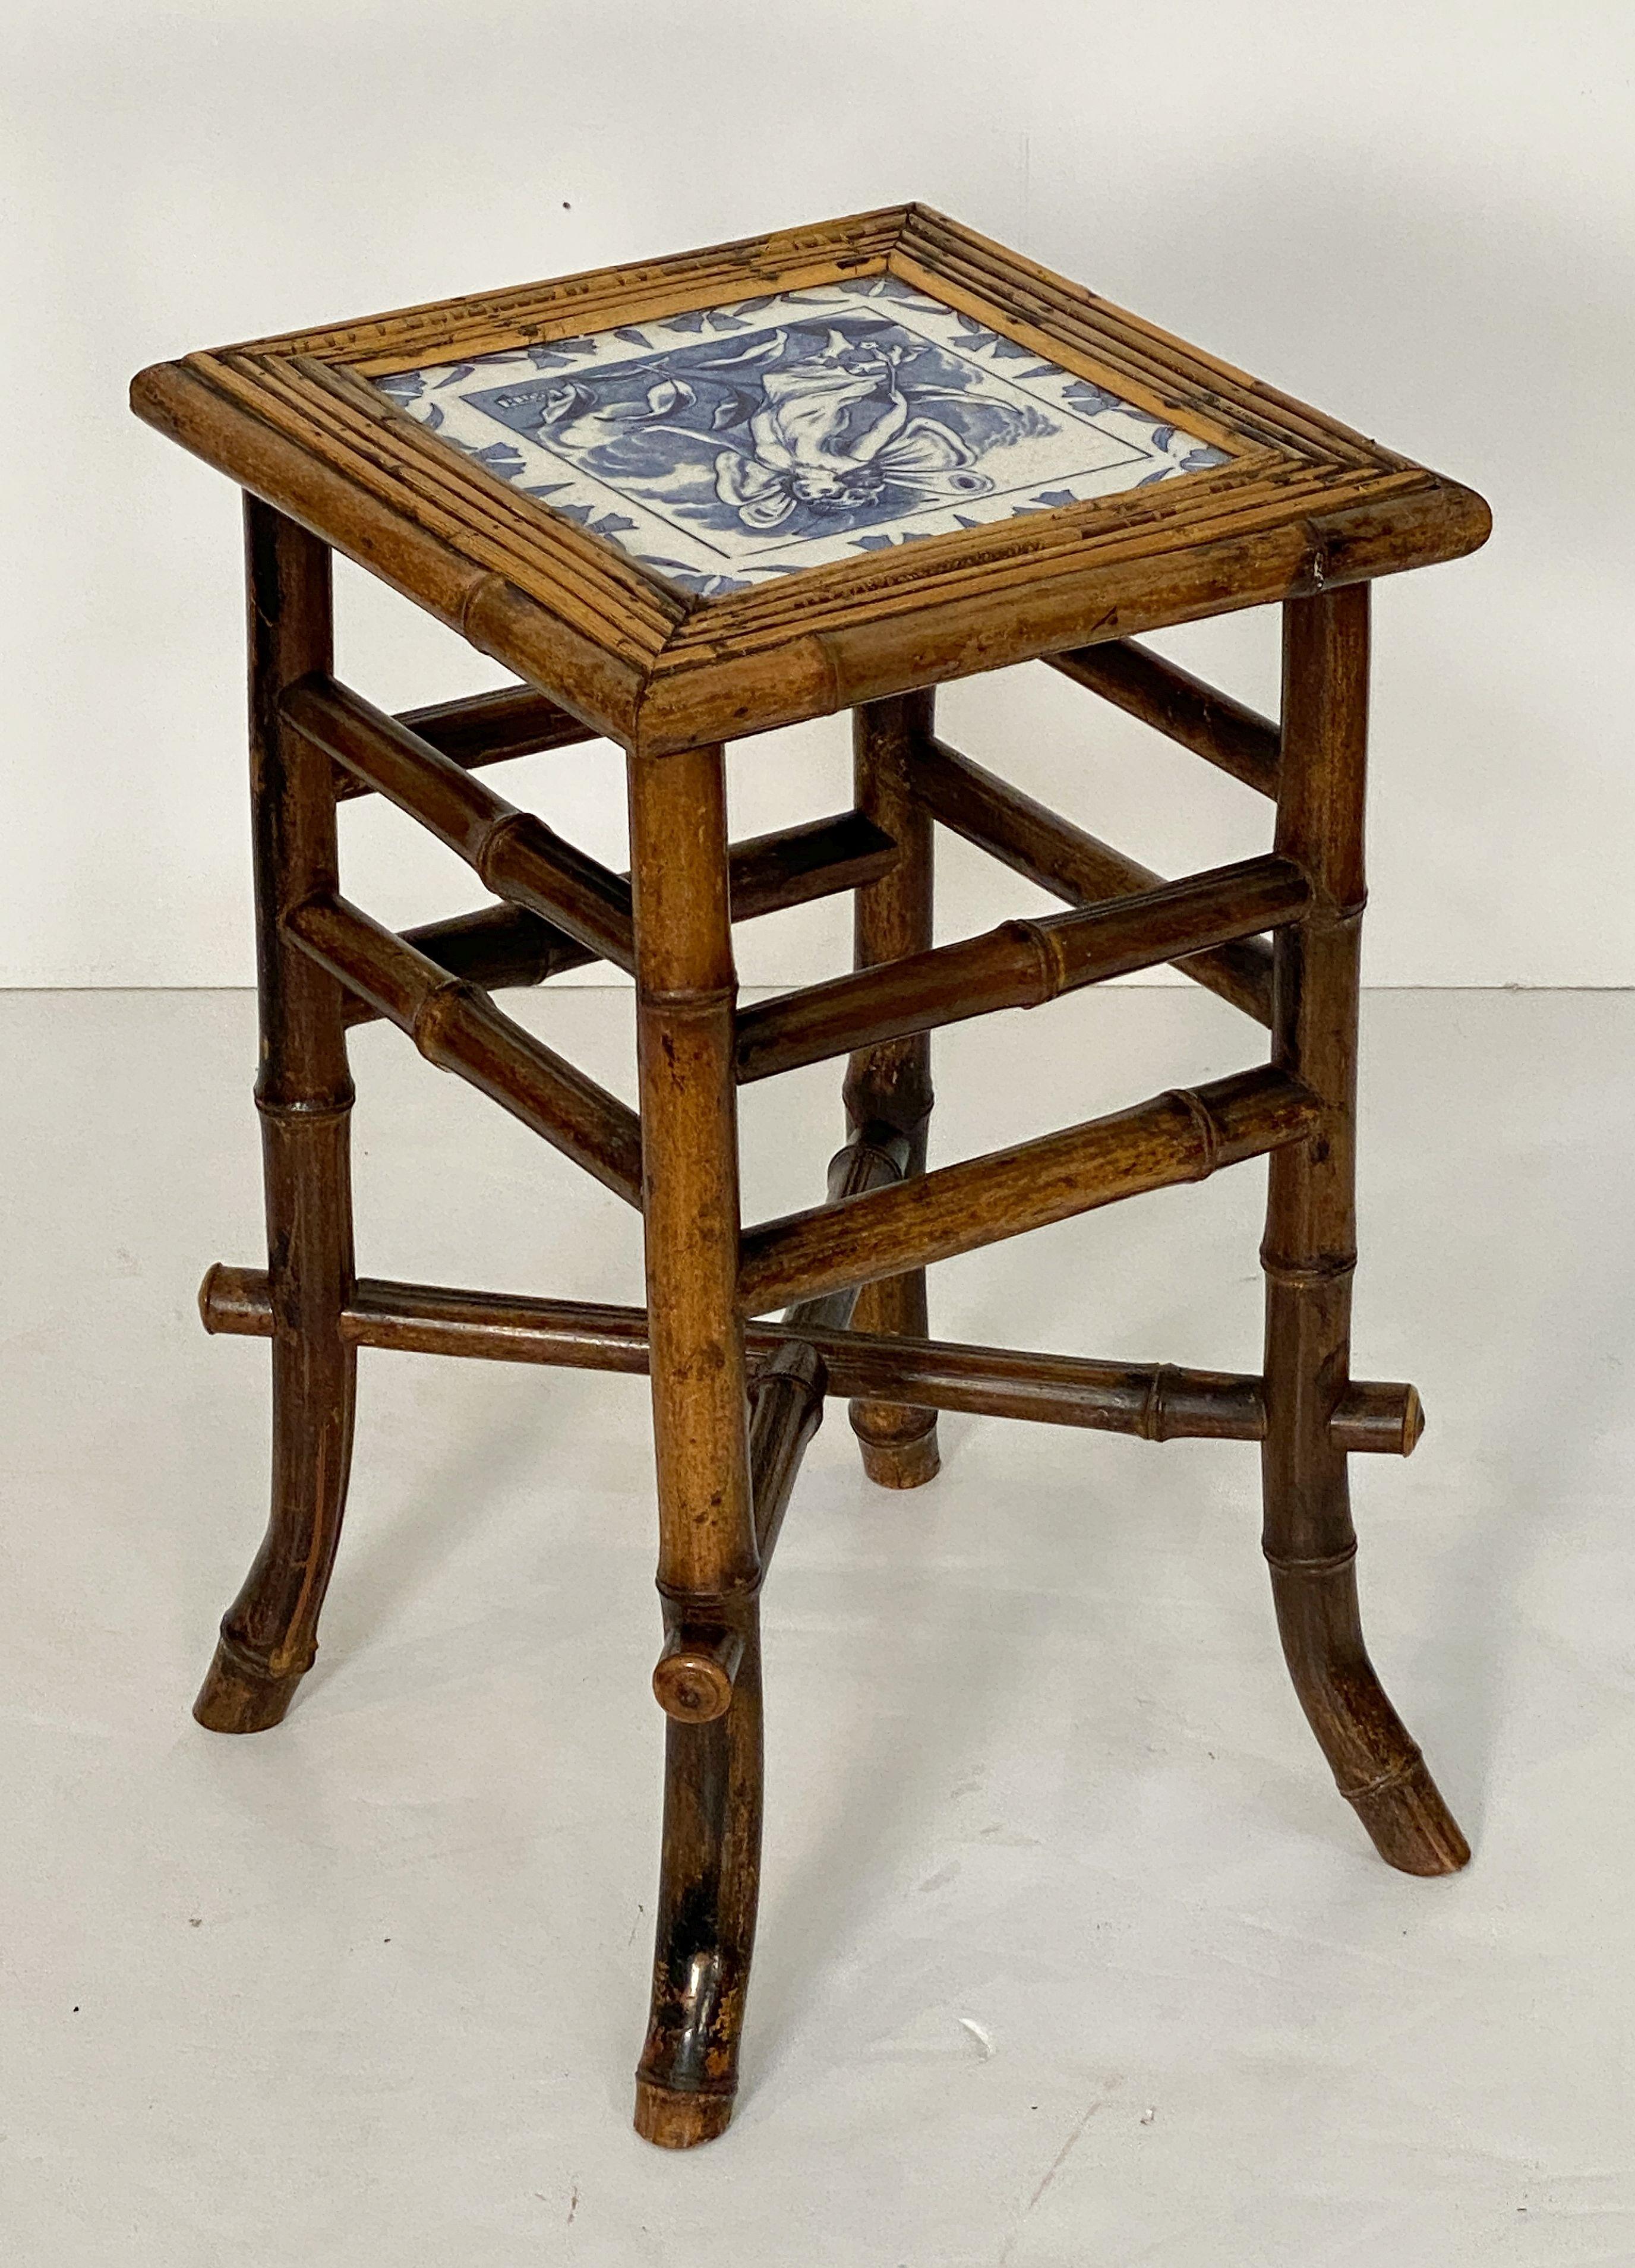 English Bamboo Table or Stool with Tile Seat from the Aesthetic Movement Era For Sale 1